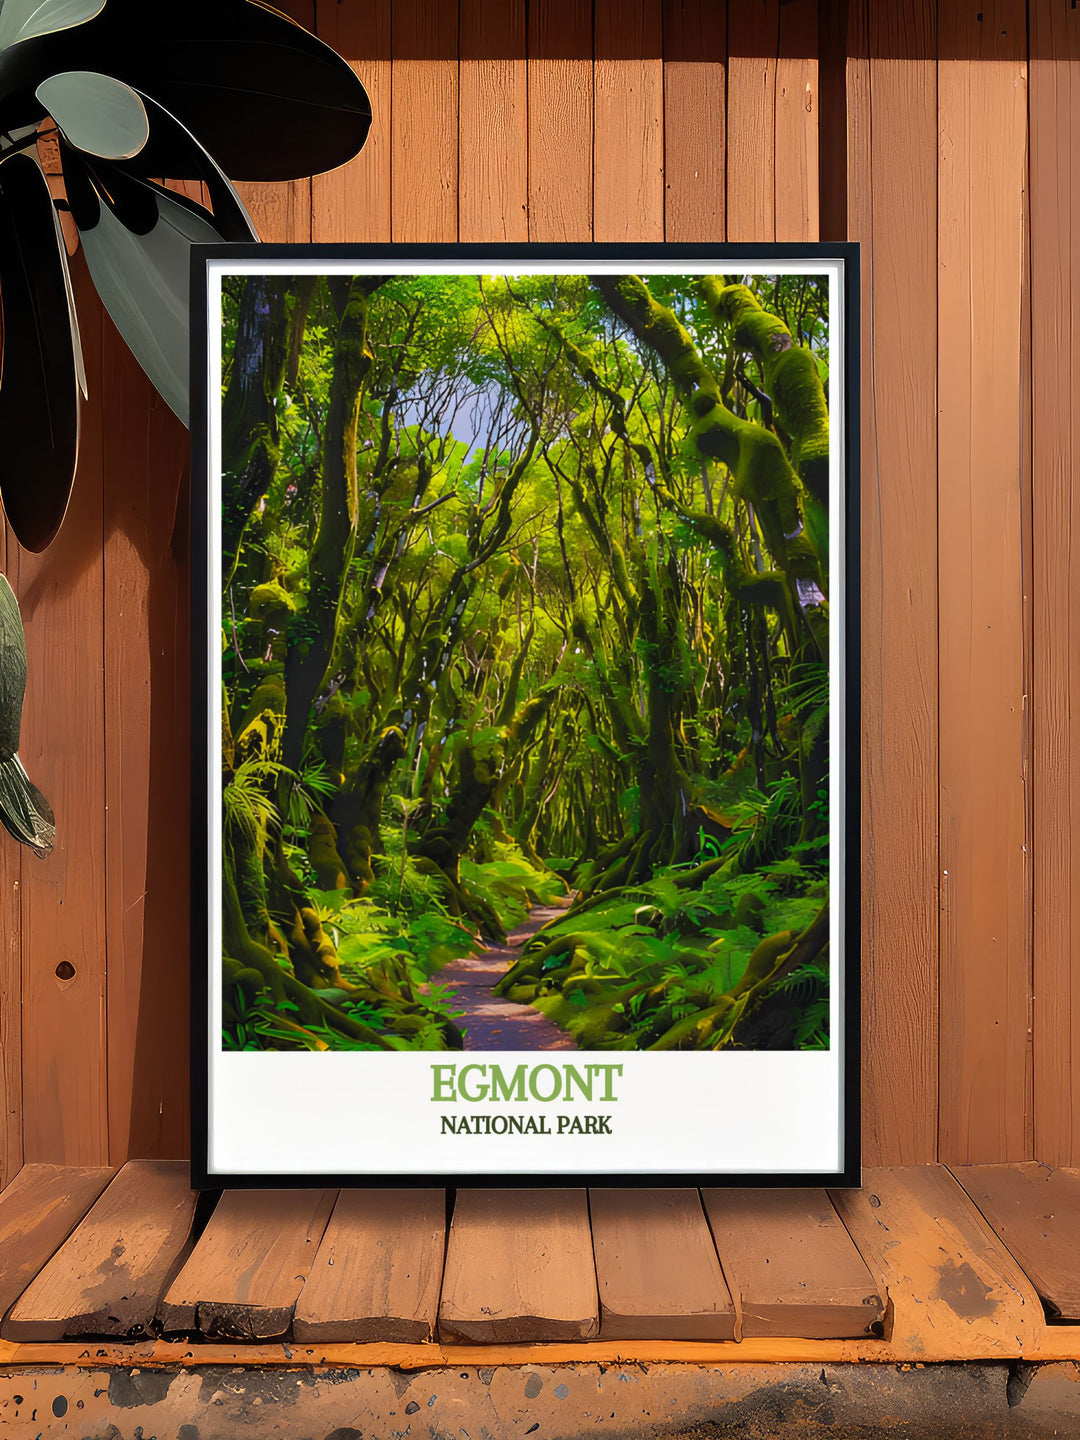 Gallery wall art showcasing the diverse landscapes of Egmont National Park, from the mystical Goblin Forest to the iconic Mount Taranaki.